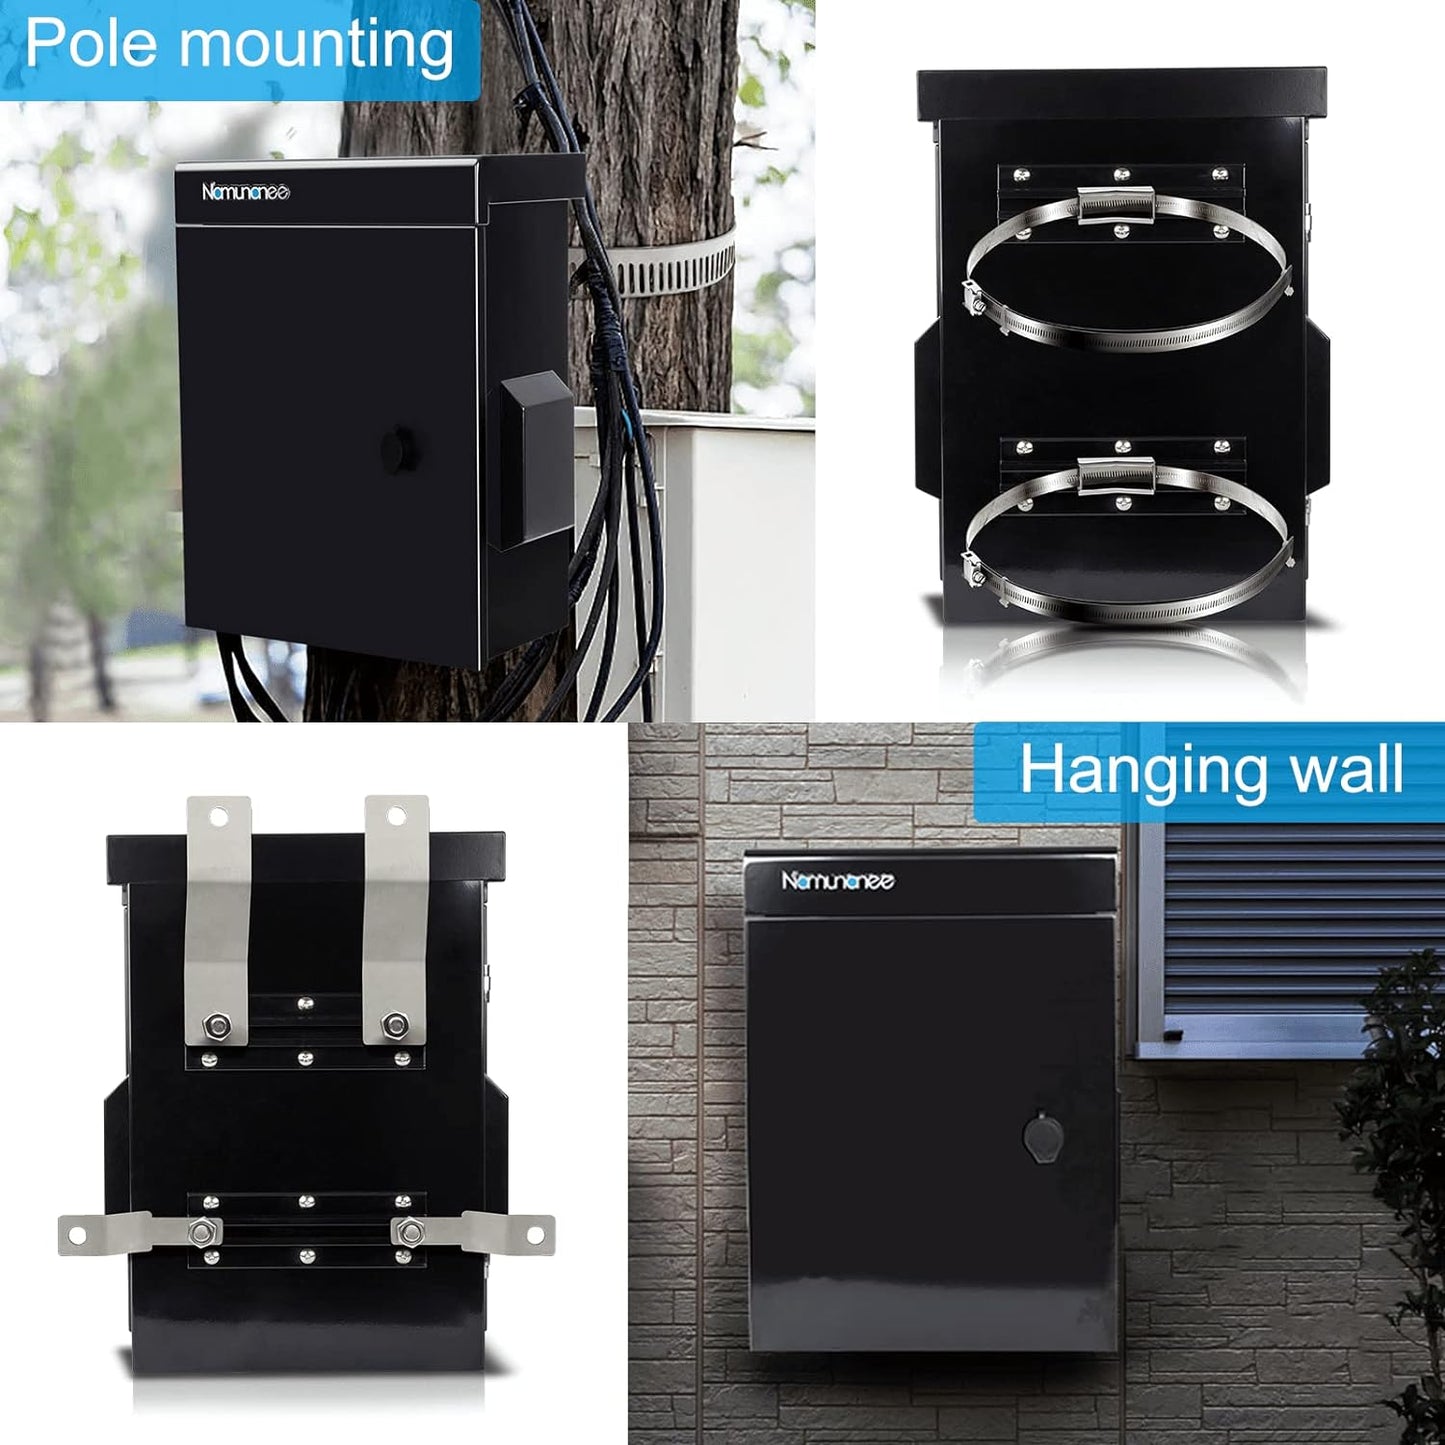 Namunanee Outdoor Electrical Box, Cold-Rolled Steel Plate, Aluminum Alloy Back Beam, One-Piece Ventilation Design, IP65 Waterproof, Wall/Pole Mounted. (17.8' x 13.8' x 7.9') (17.8' x 13.8' x 7.9')